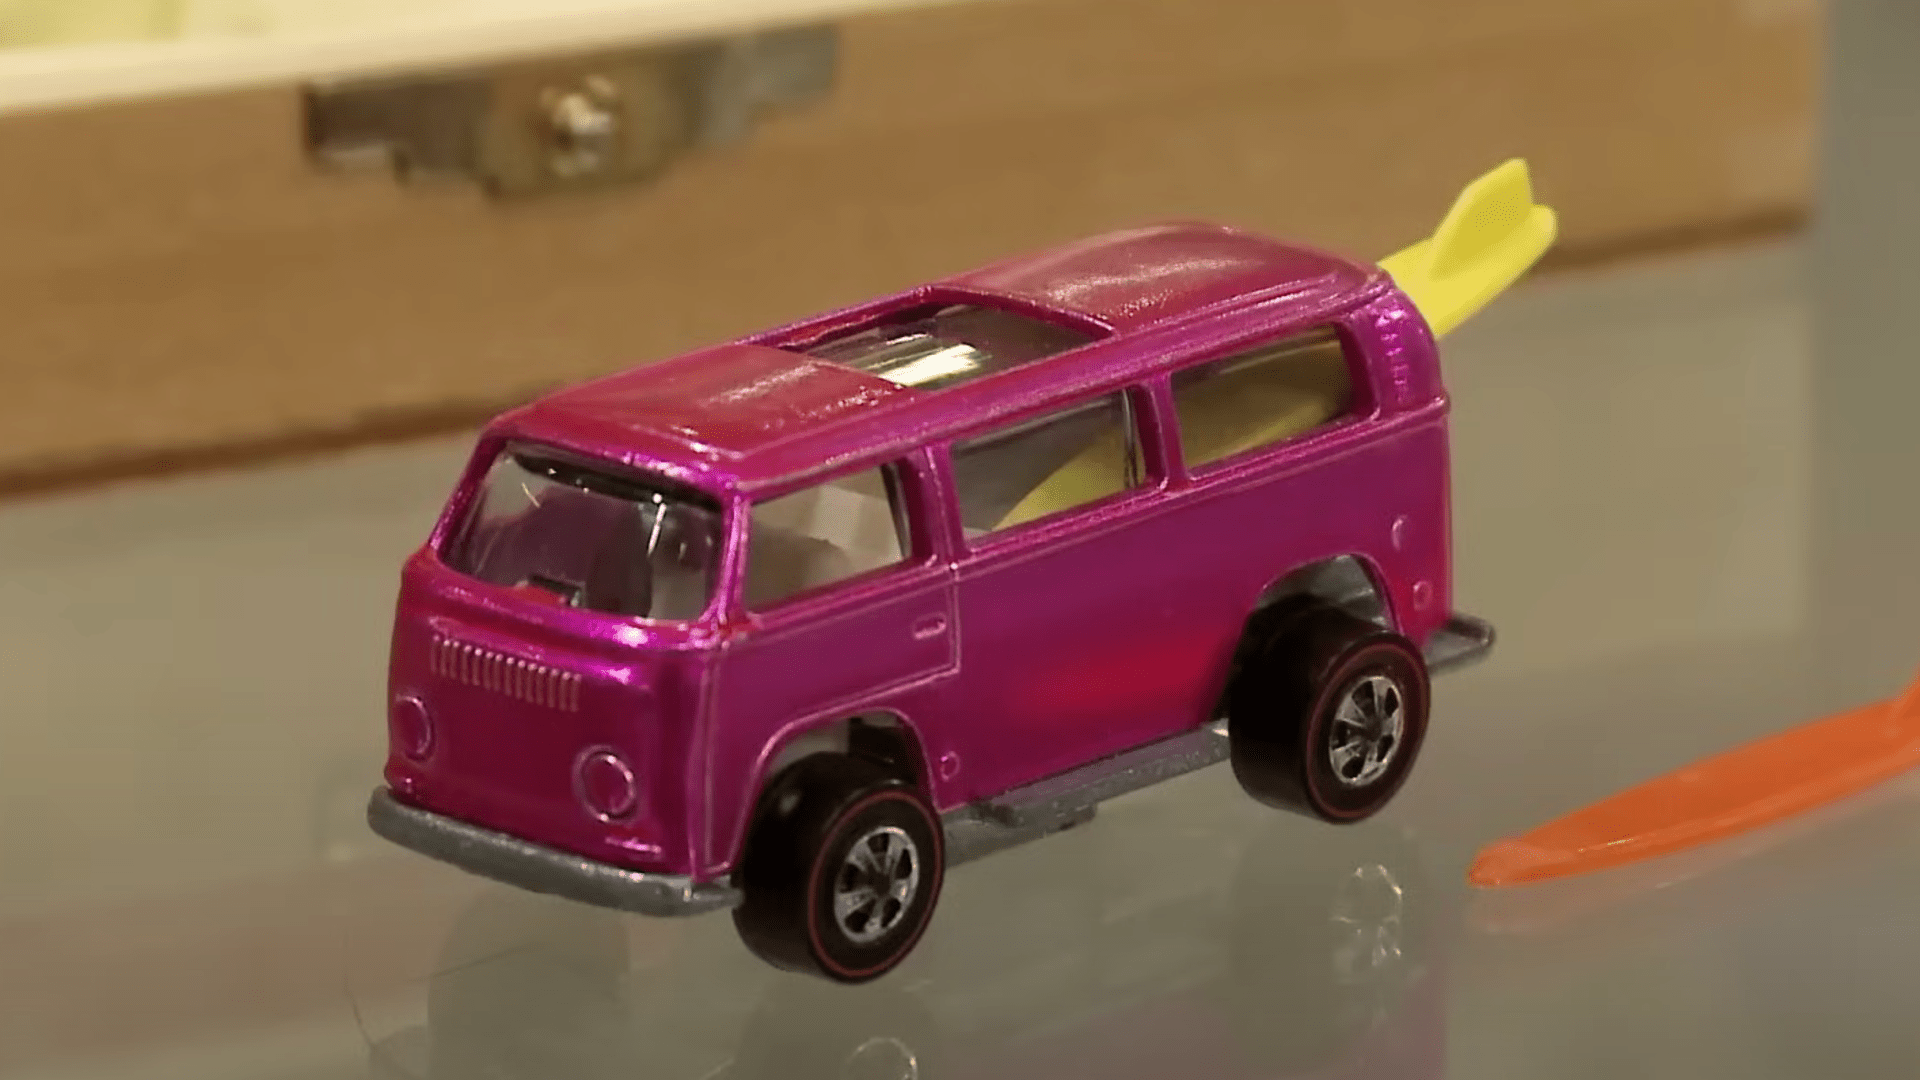 Most Expensive Hot Wheels toy - Pink VW Bus